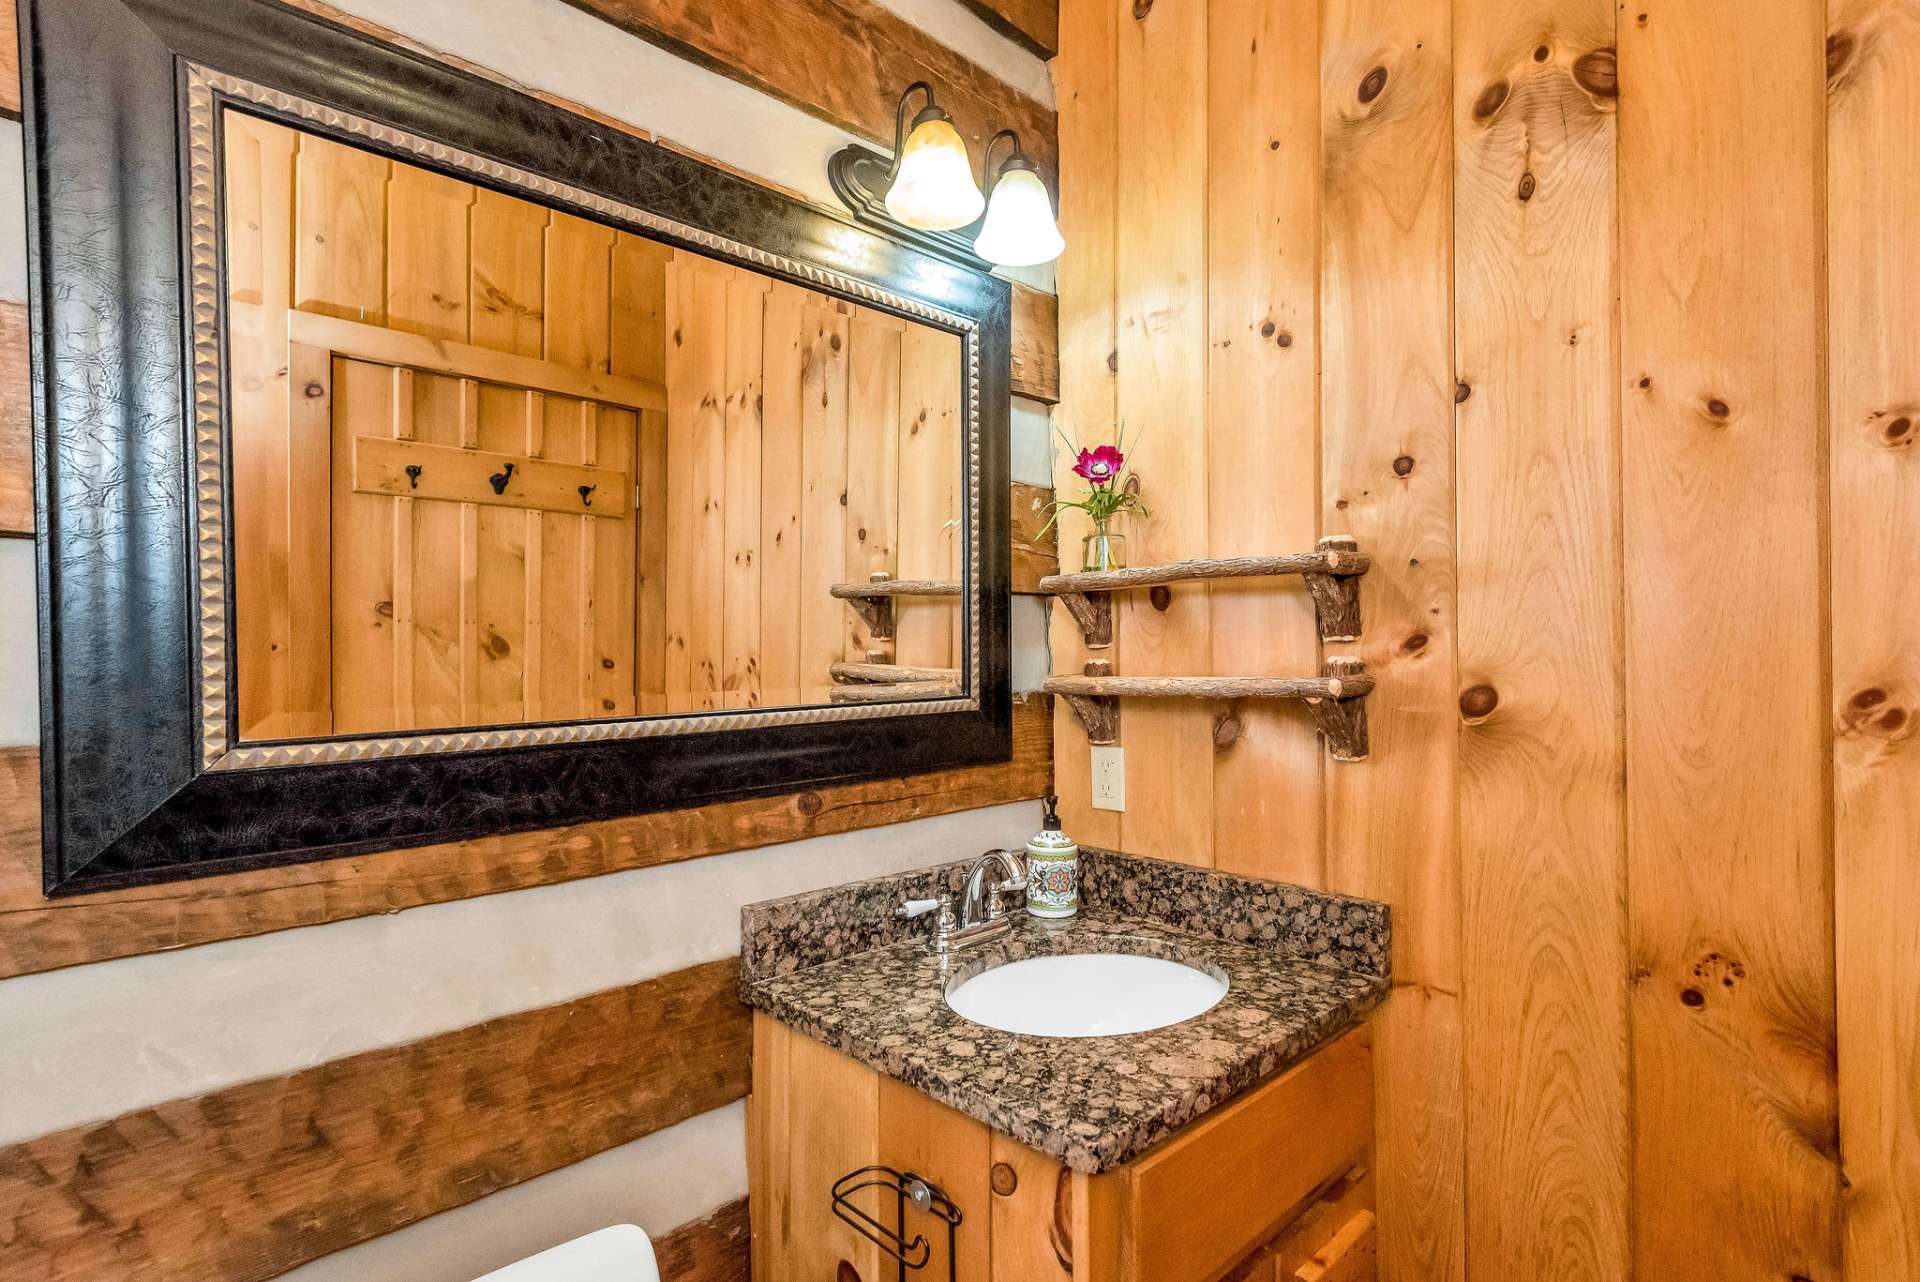 The loft features a full bath with a granite vanity top.